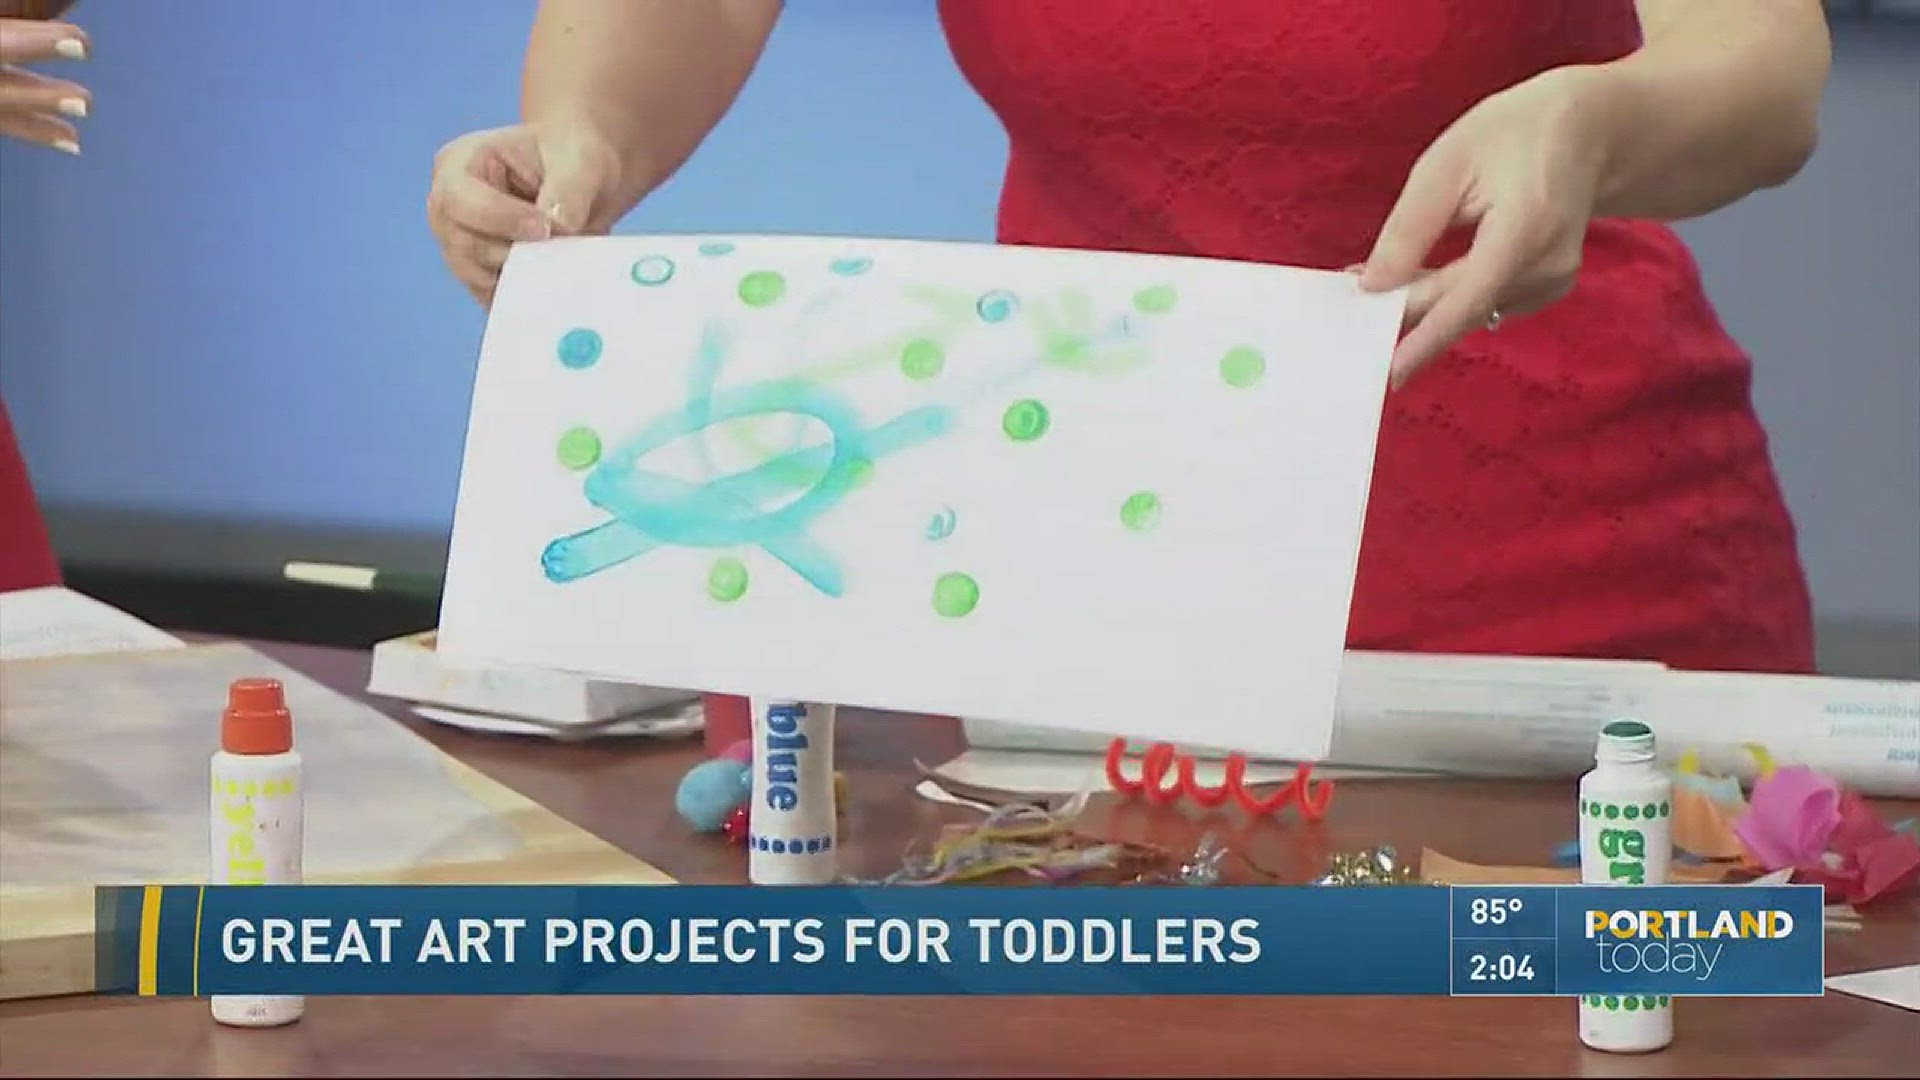 Great art projects for toddlers